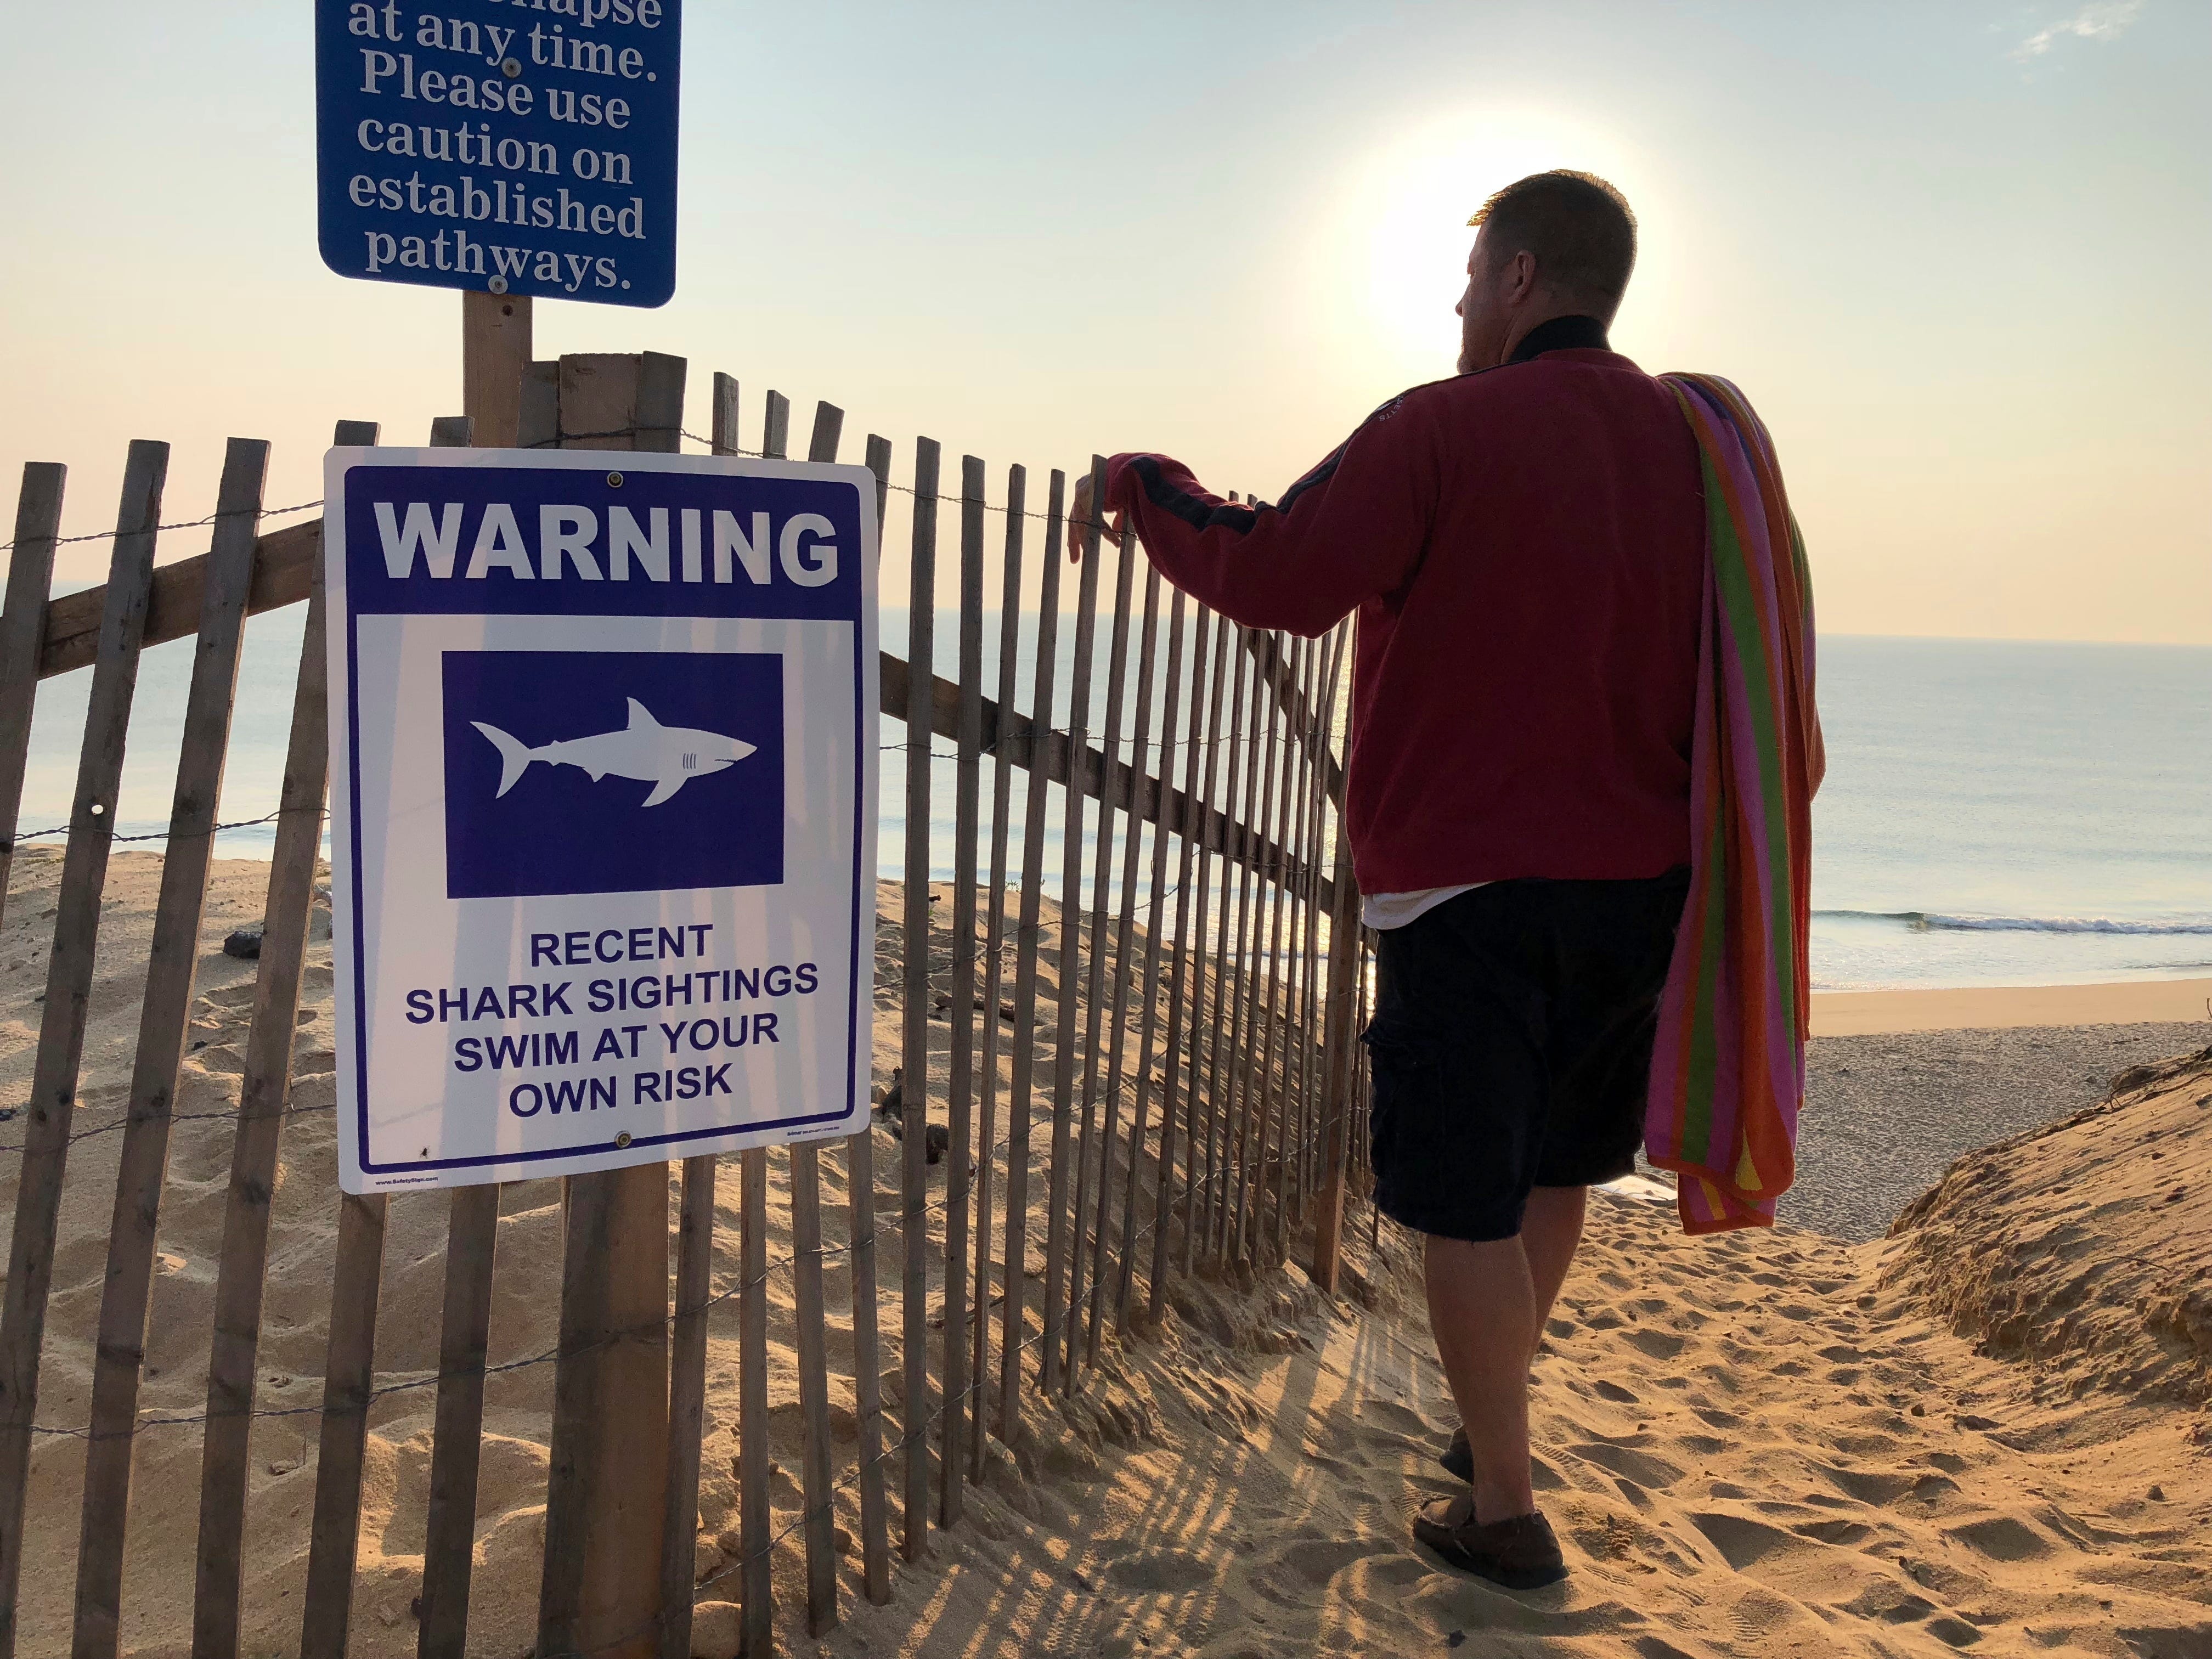 Steve McFadden, 49, of Plattsburgh, N.Y. gazes at Long Nook Beach in Truro, Mass., on Aug. 16, 2018. Authorities closed the Cape Cod beach to swimmers after a man was attacked by a shark on Wednesday - the first attack on a person in Massachusetts si